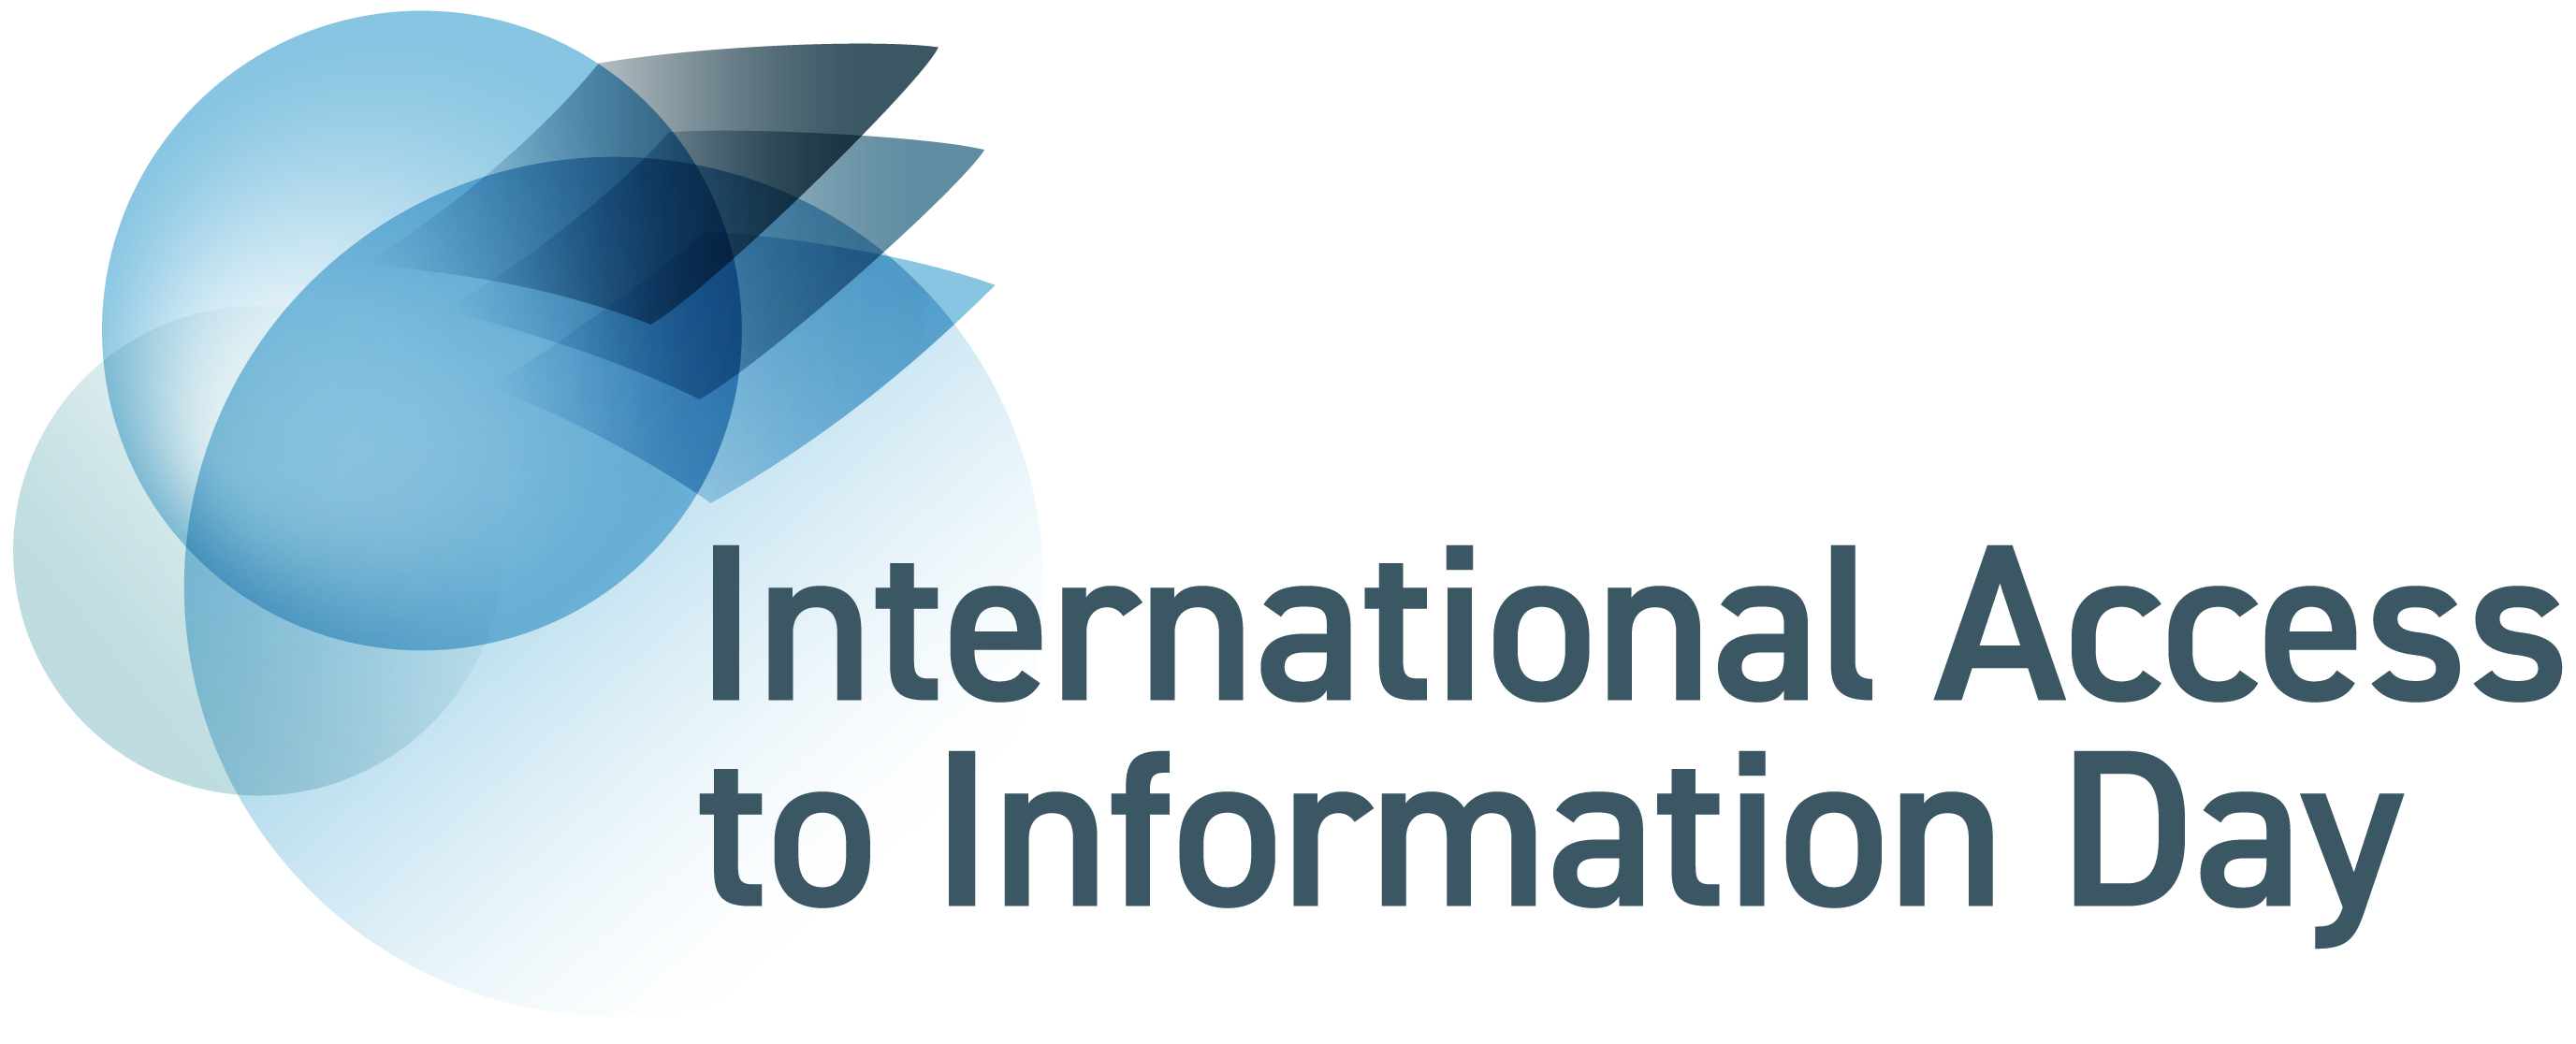 International Access to Information Day banner